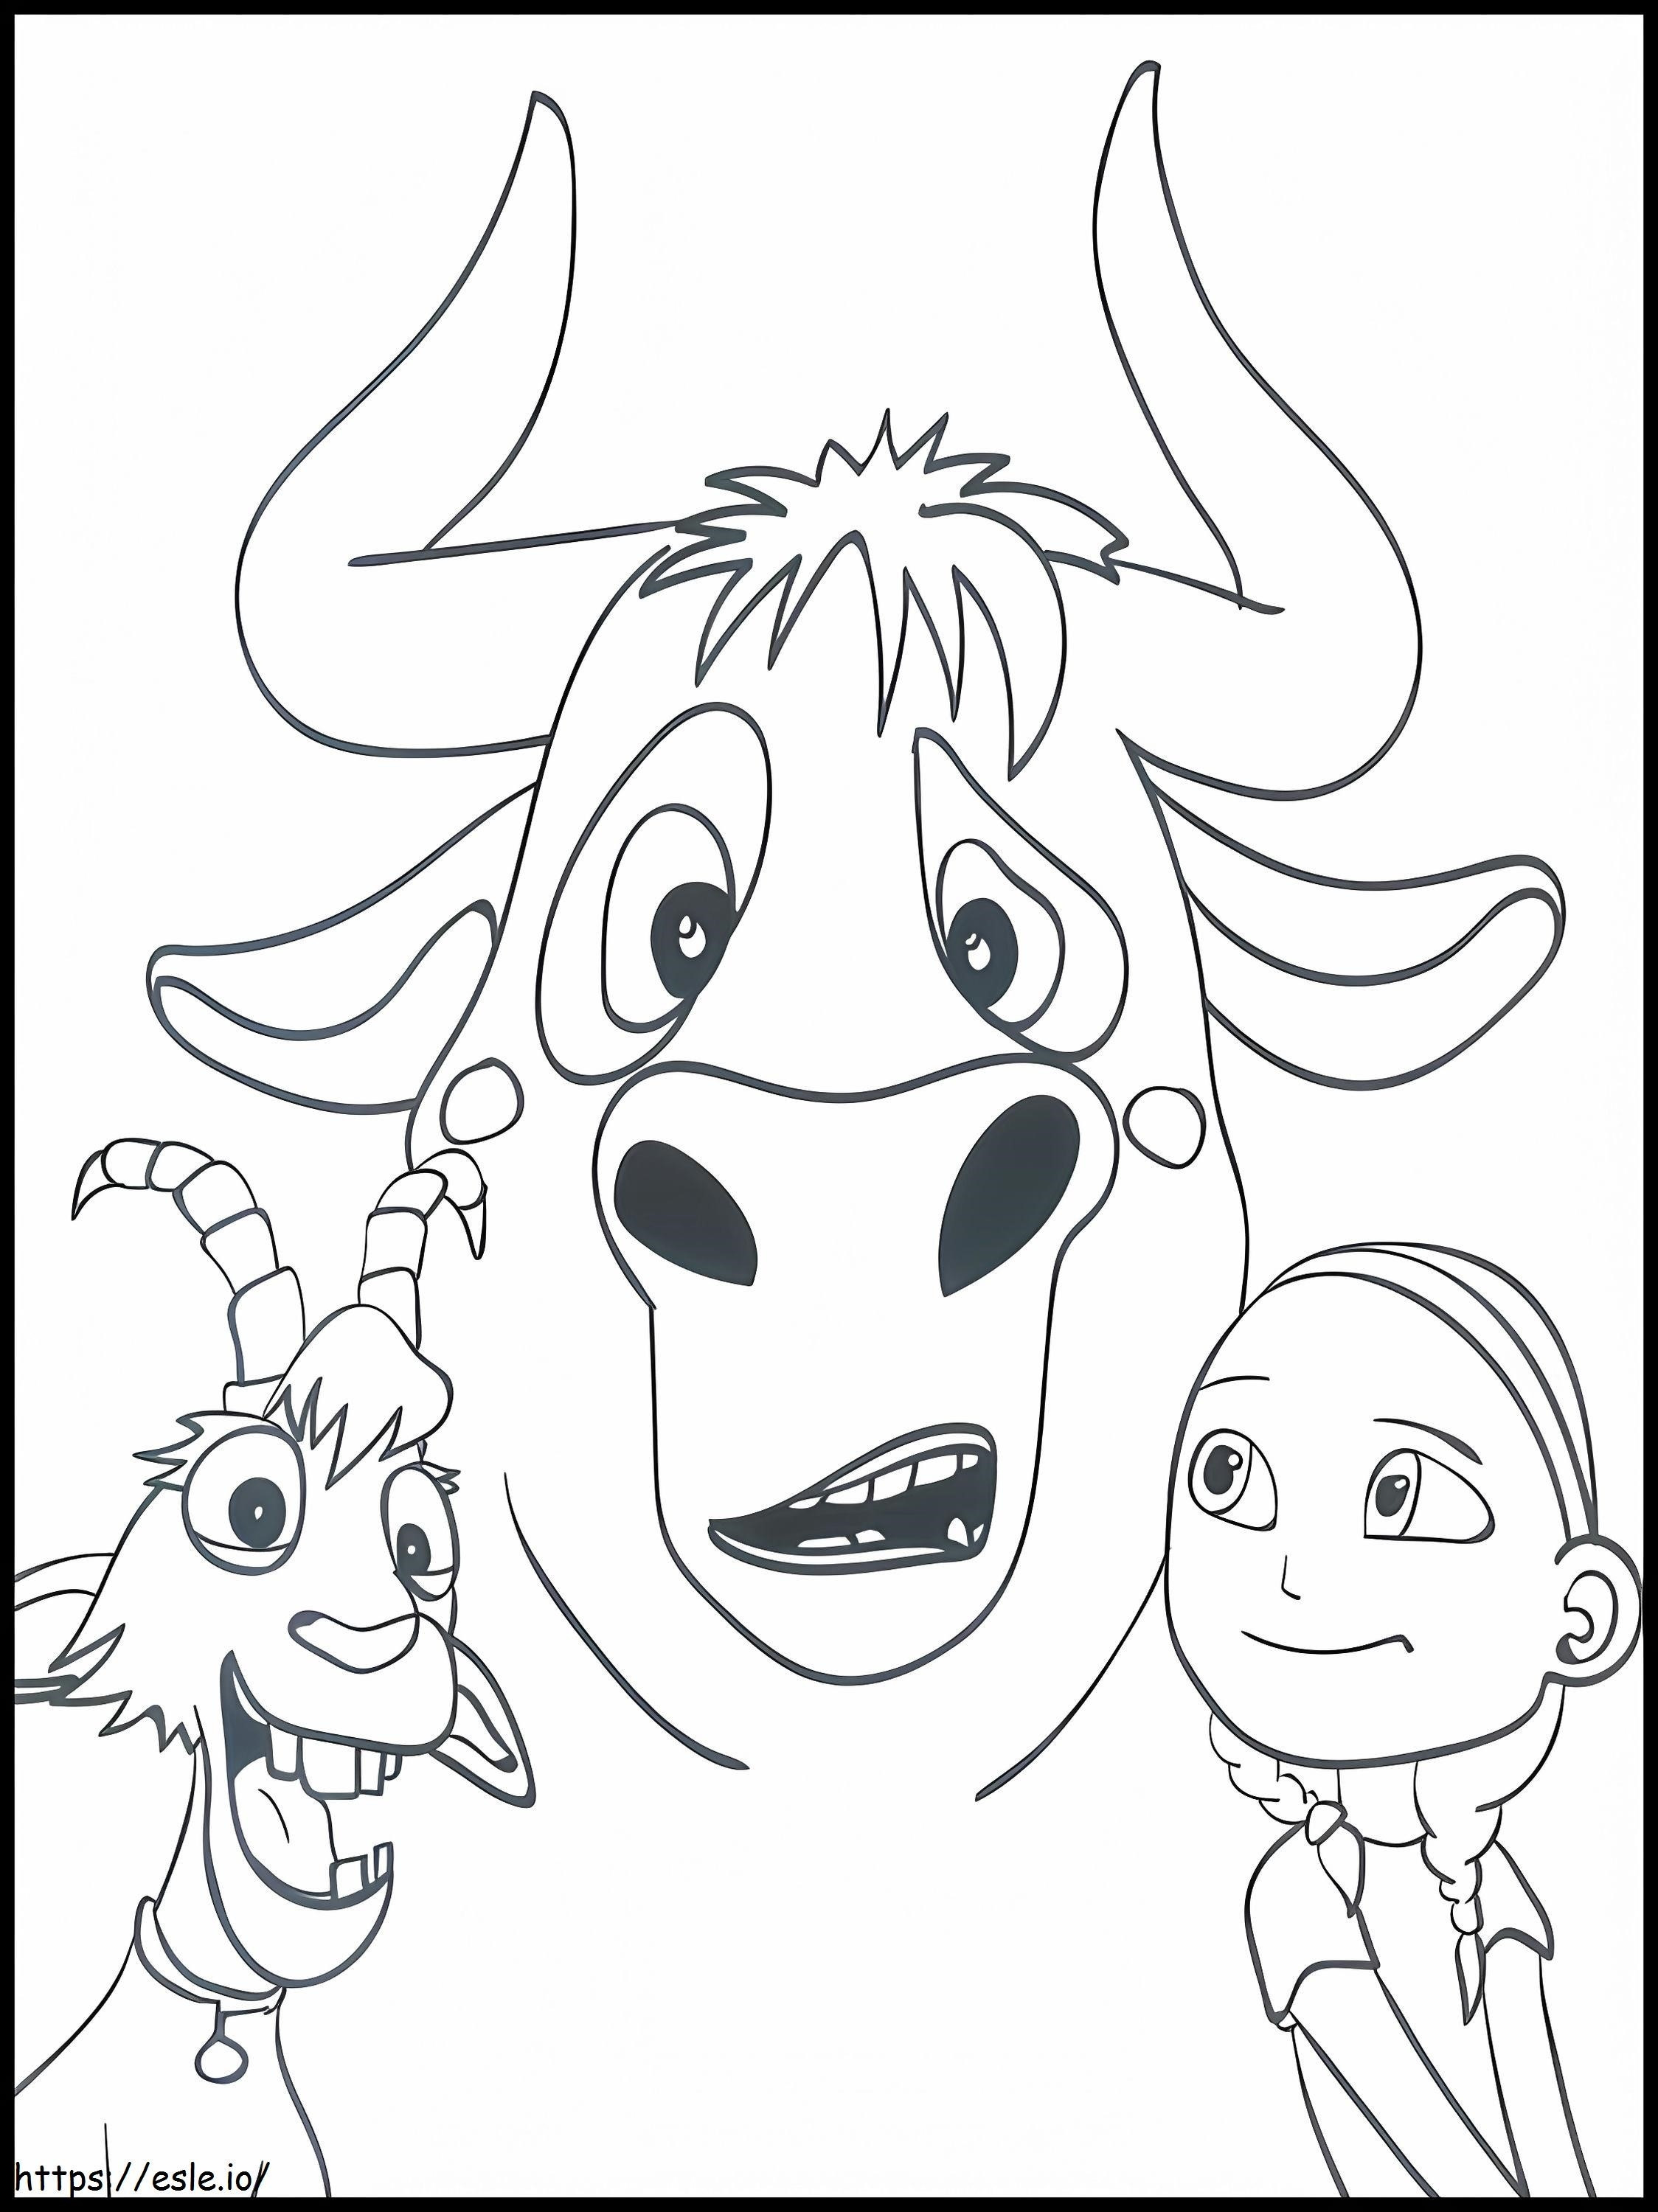 Ferdinand With Lupe And Nina A4 coloring page